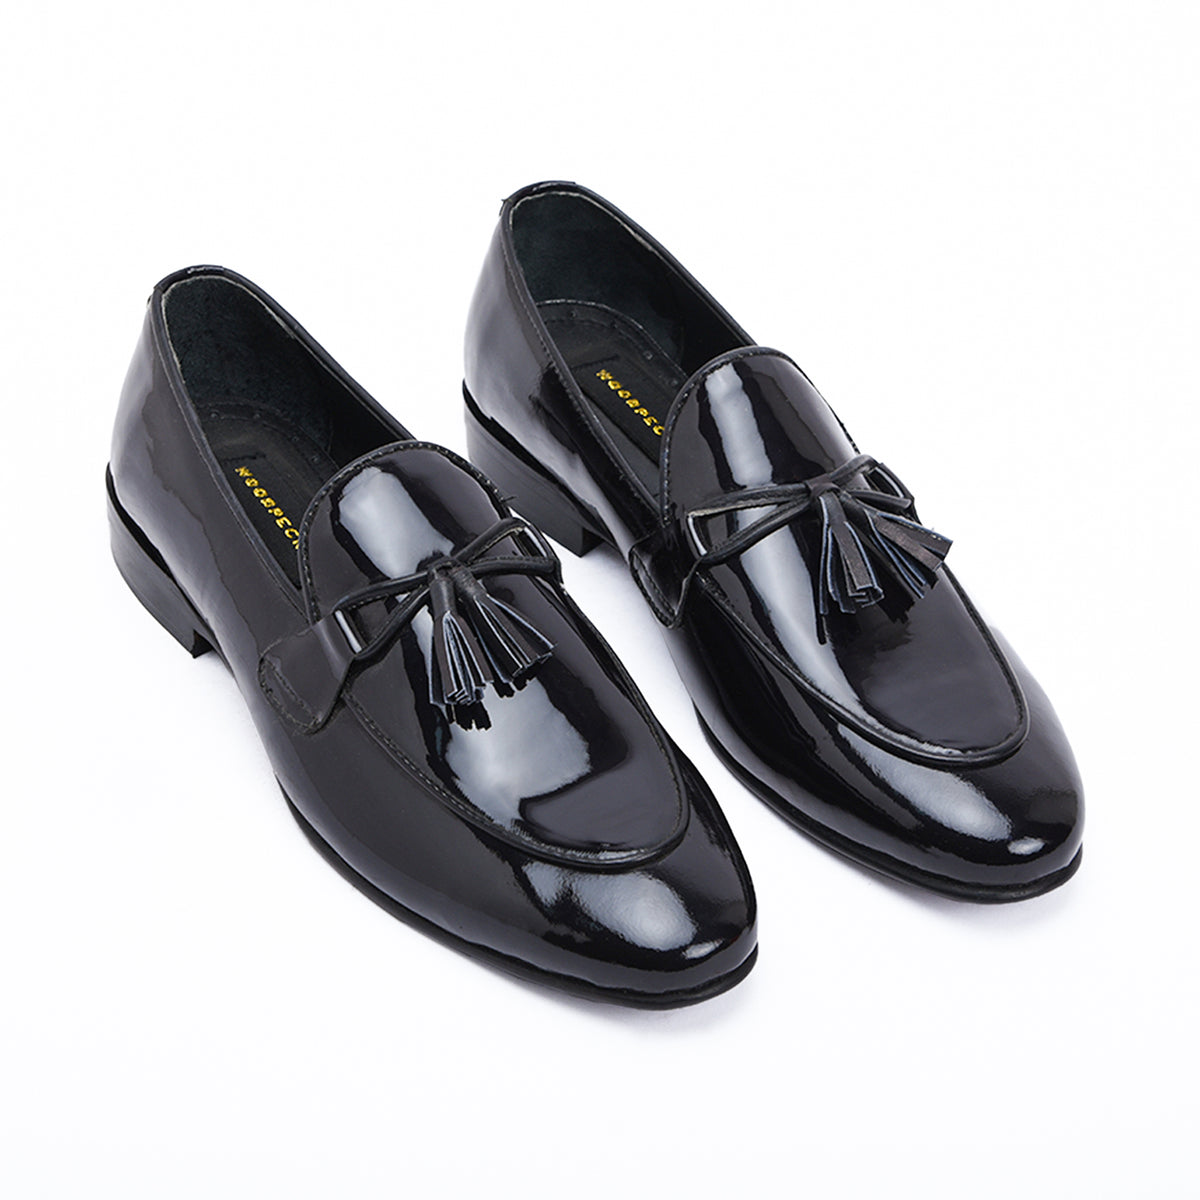 Black Montica Loafers – The Woodpecker shoes